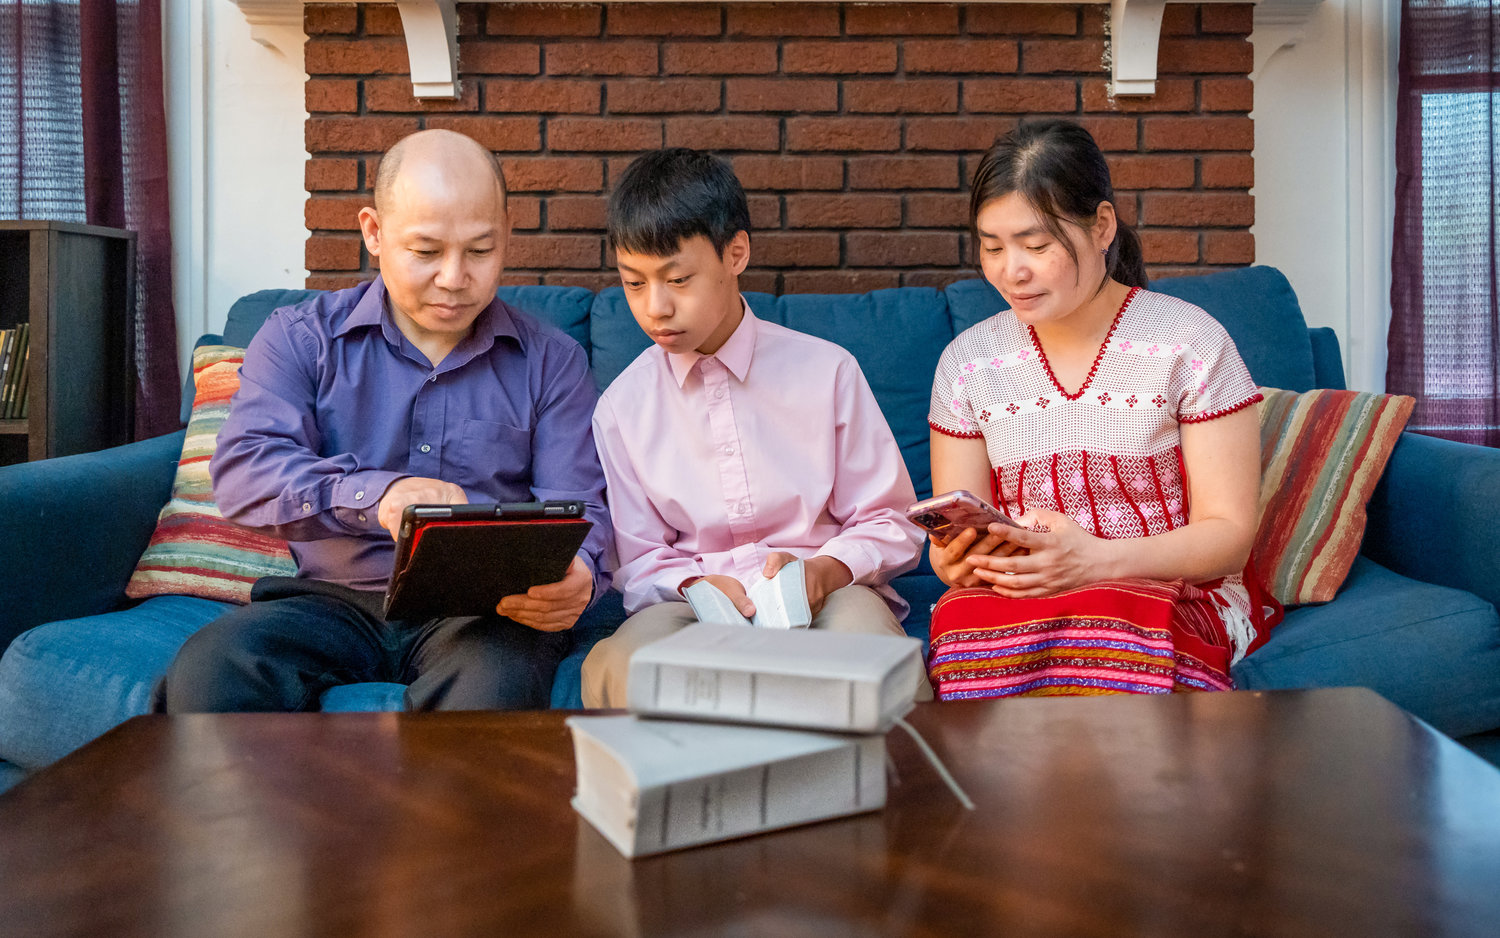 Ku Law and Hla Htoo, of Utica, read the Bible with their 13-year-old son in their native language, S’gaw Karen, on jw.org.